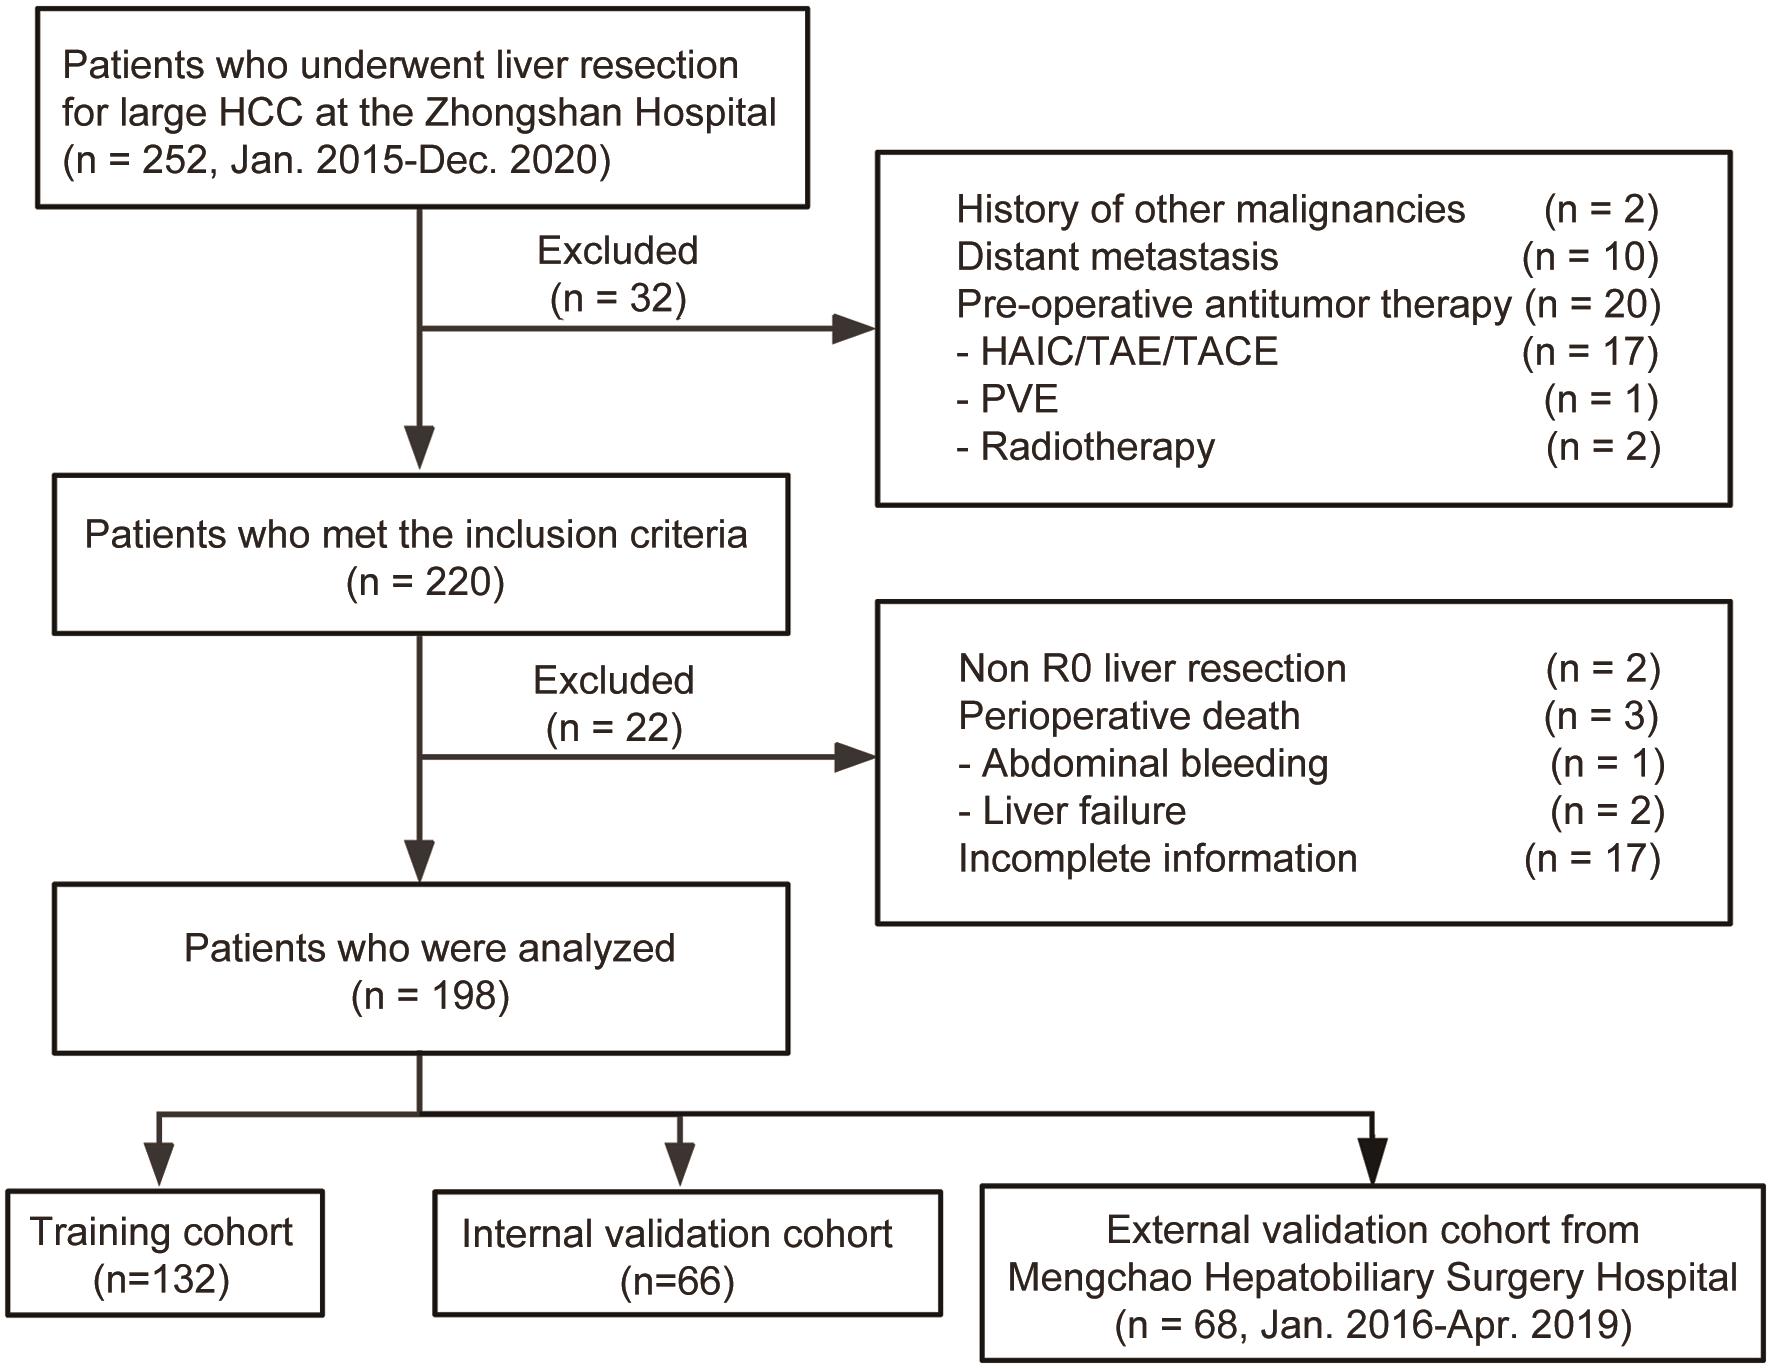 Flowchart of patients identified in this study.